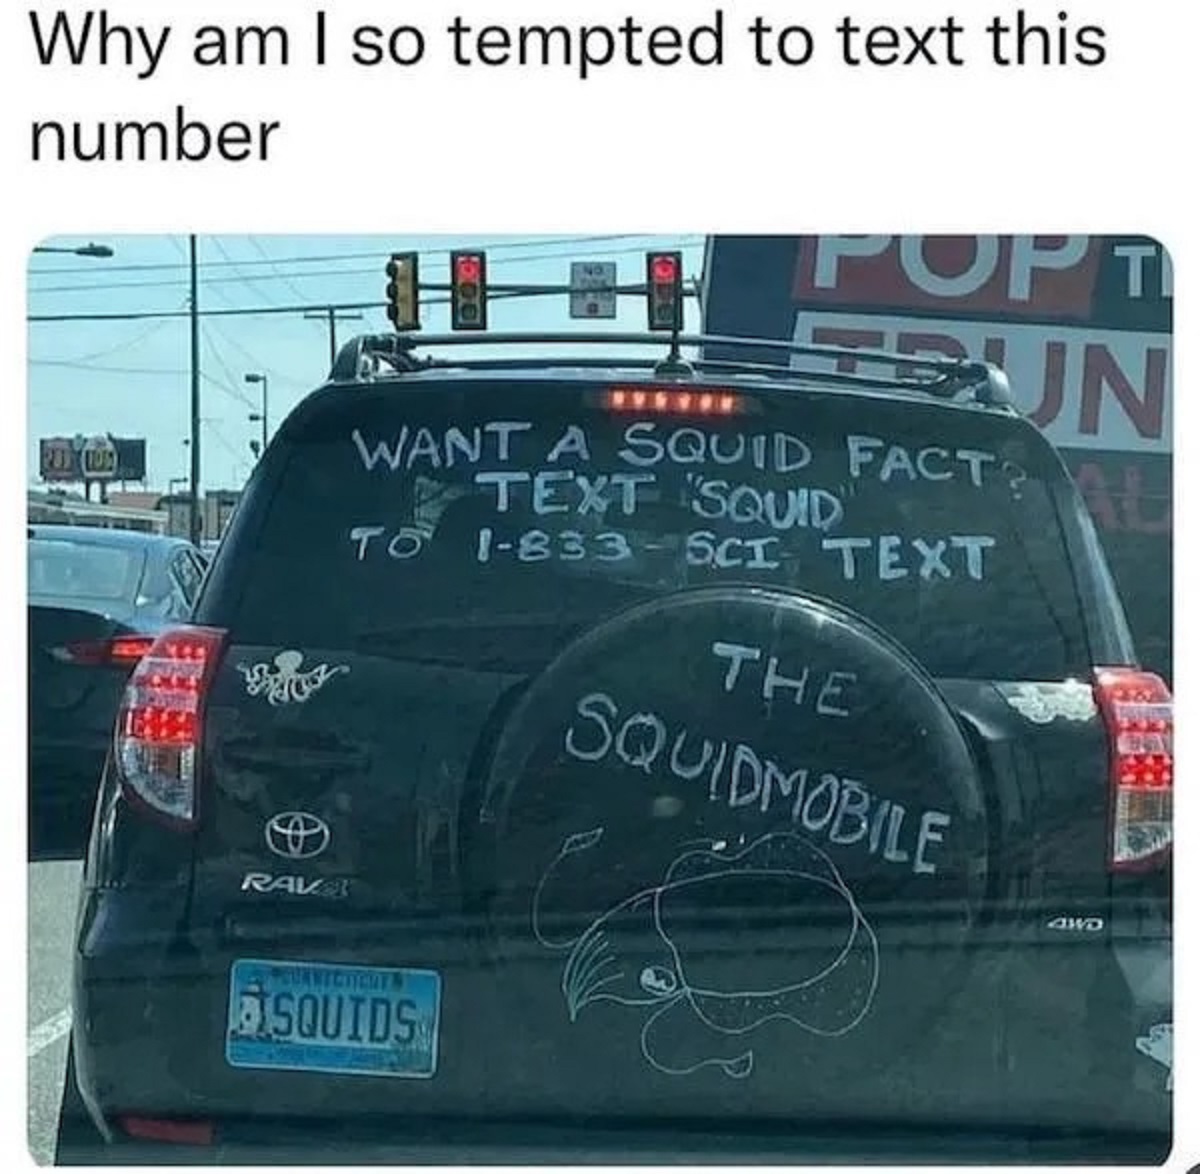 vehicle registration plate - Why am I so tempted to text this number H Popt Un Want A Squid Fact Text Squid" To 1833 Sci Text The Squidmobile Awd Ravex Sunvicticien Squids